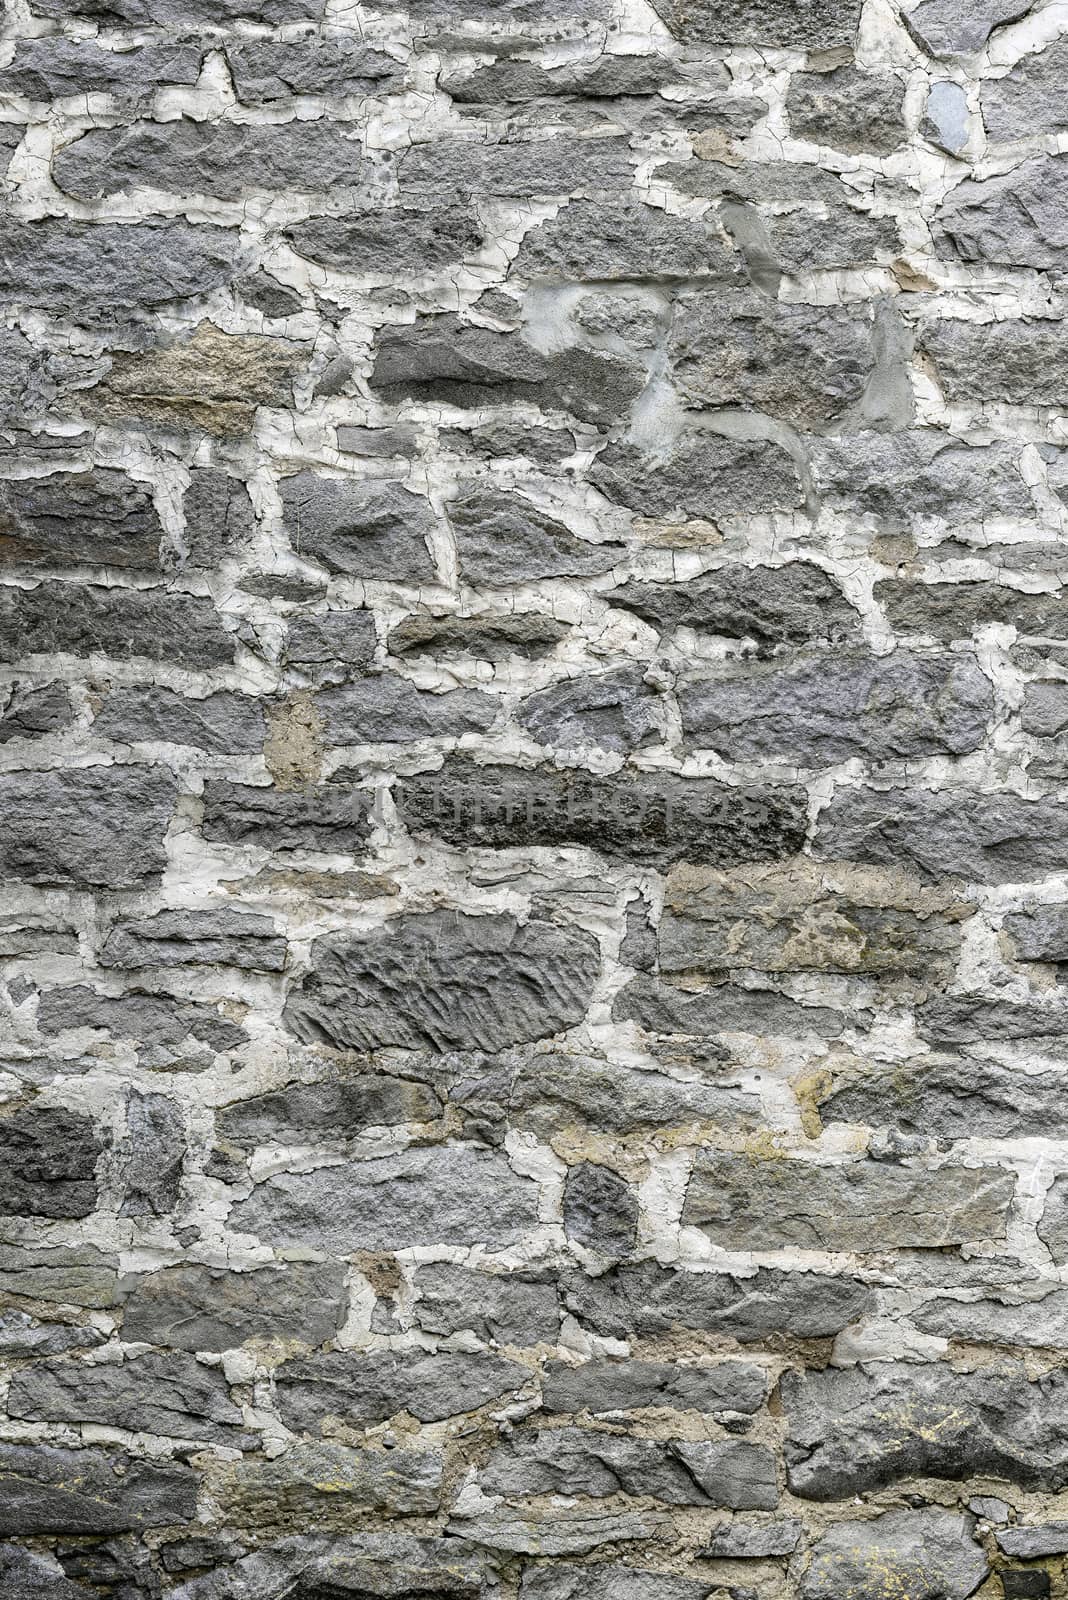 Two Hundred Year Old Stone Wall Vertical by stockbuster1